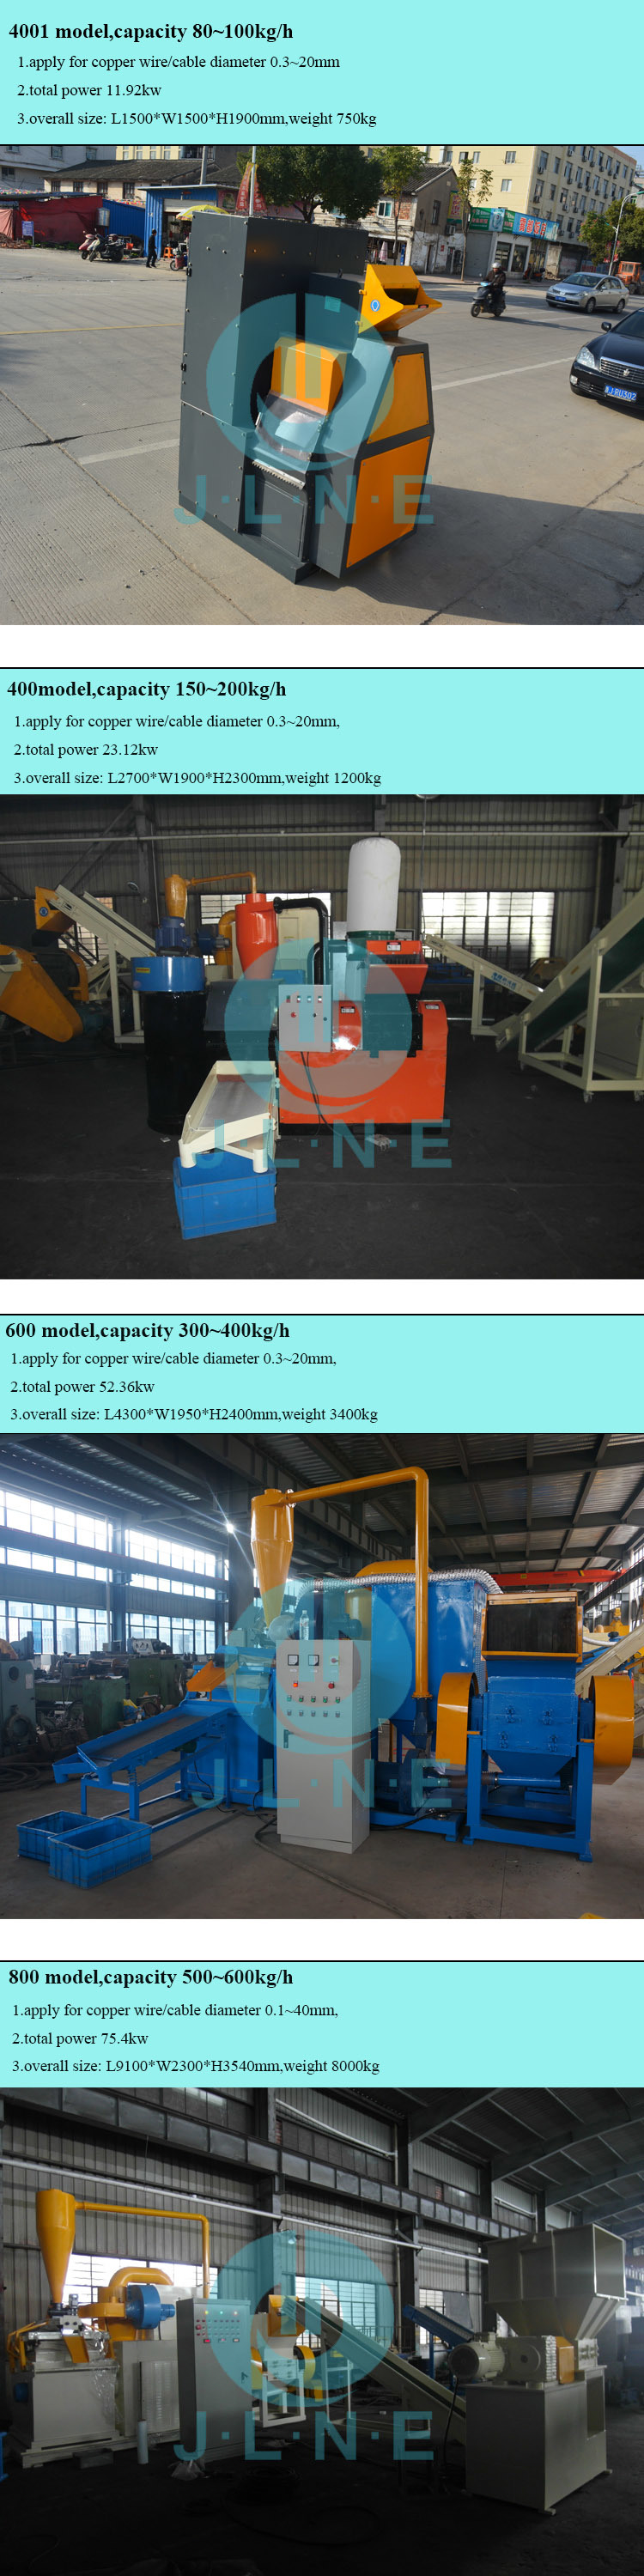 Scrap Copper Cable Recycling Machine for Sale